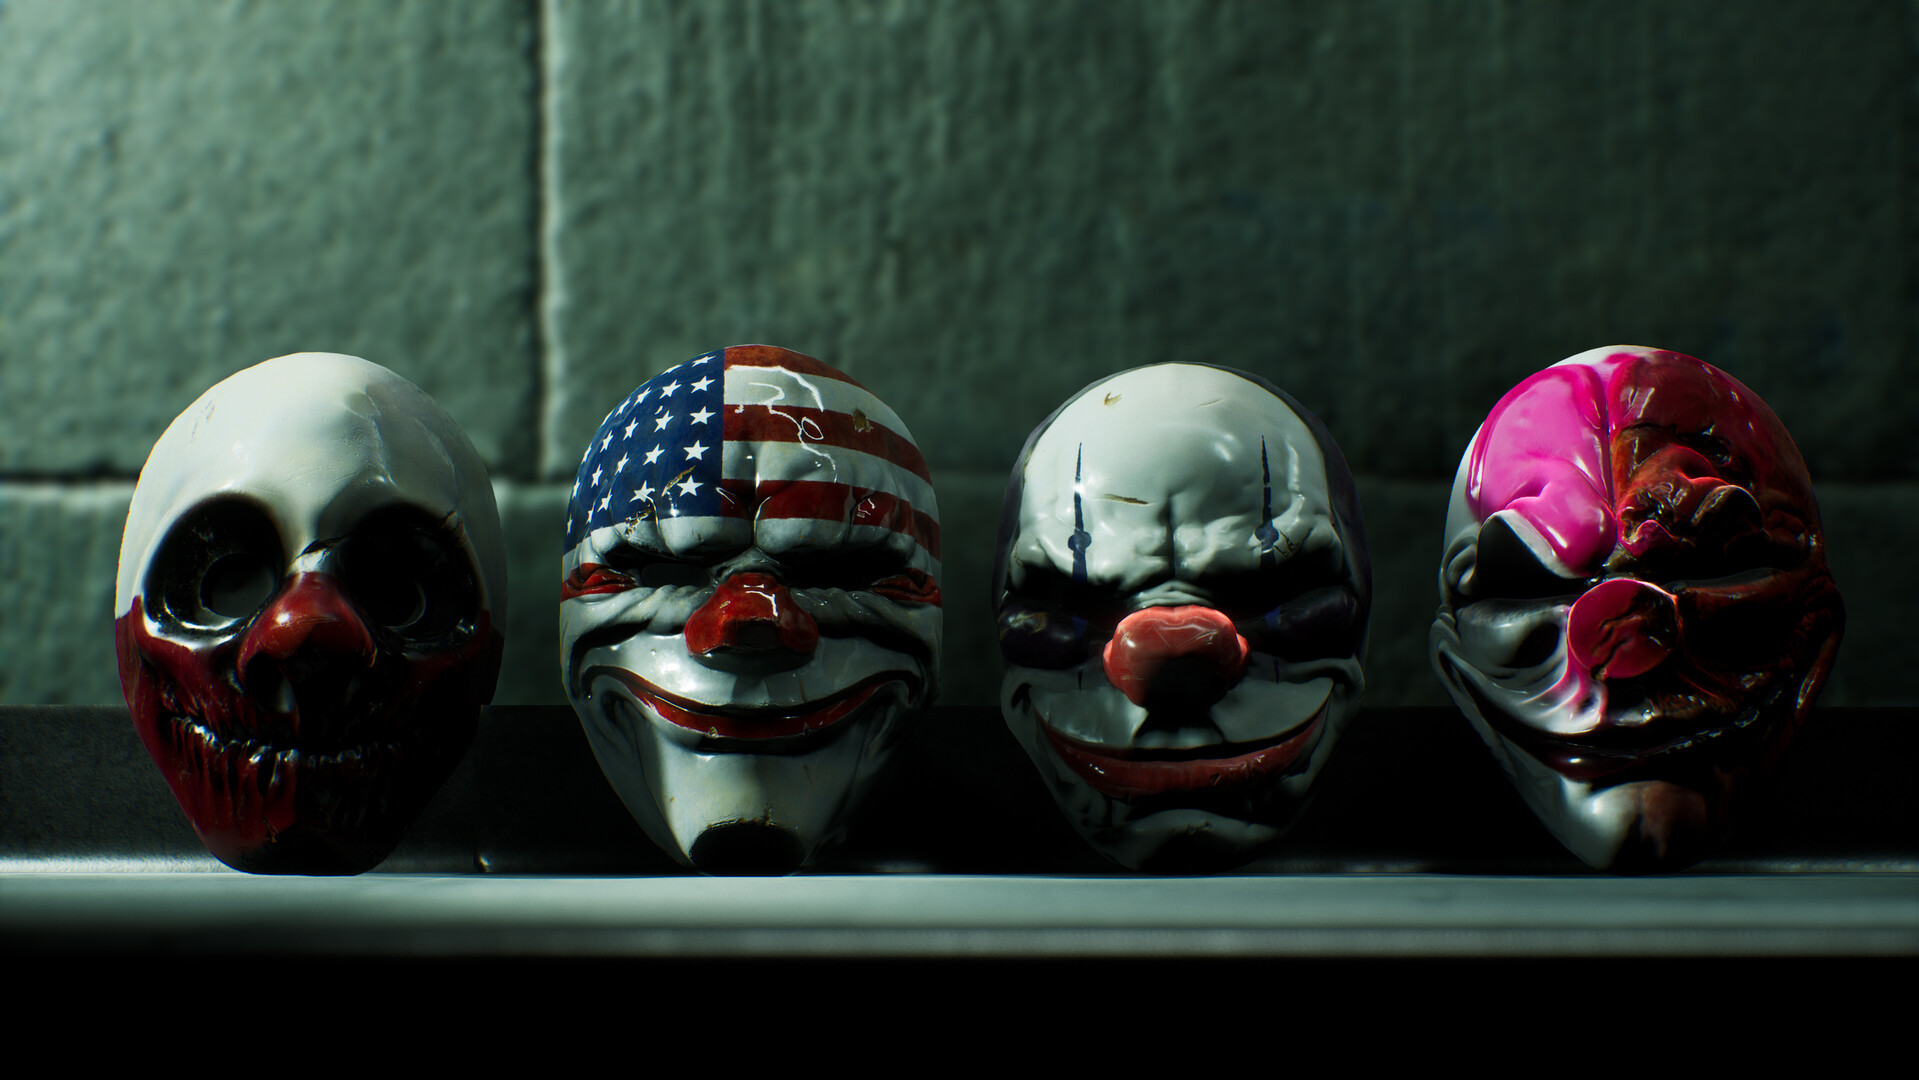 PAYDAY 3 Playstation 5 Account